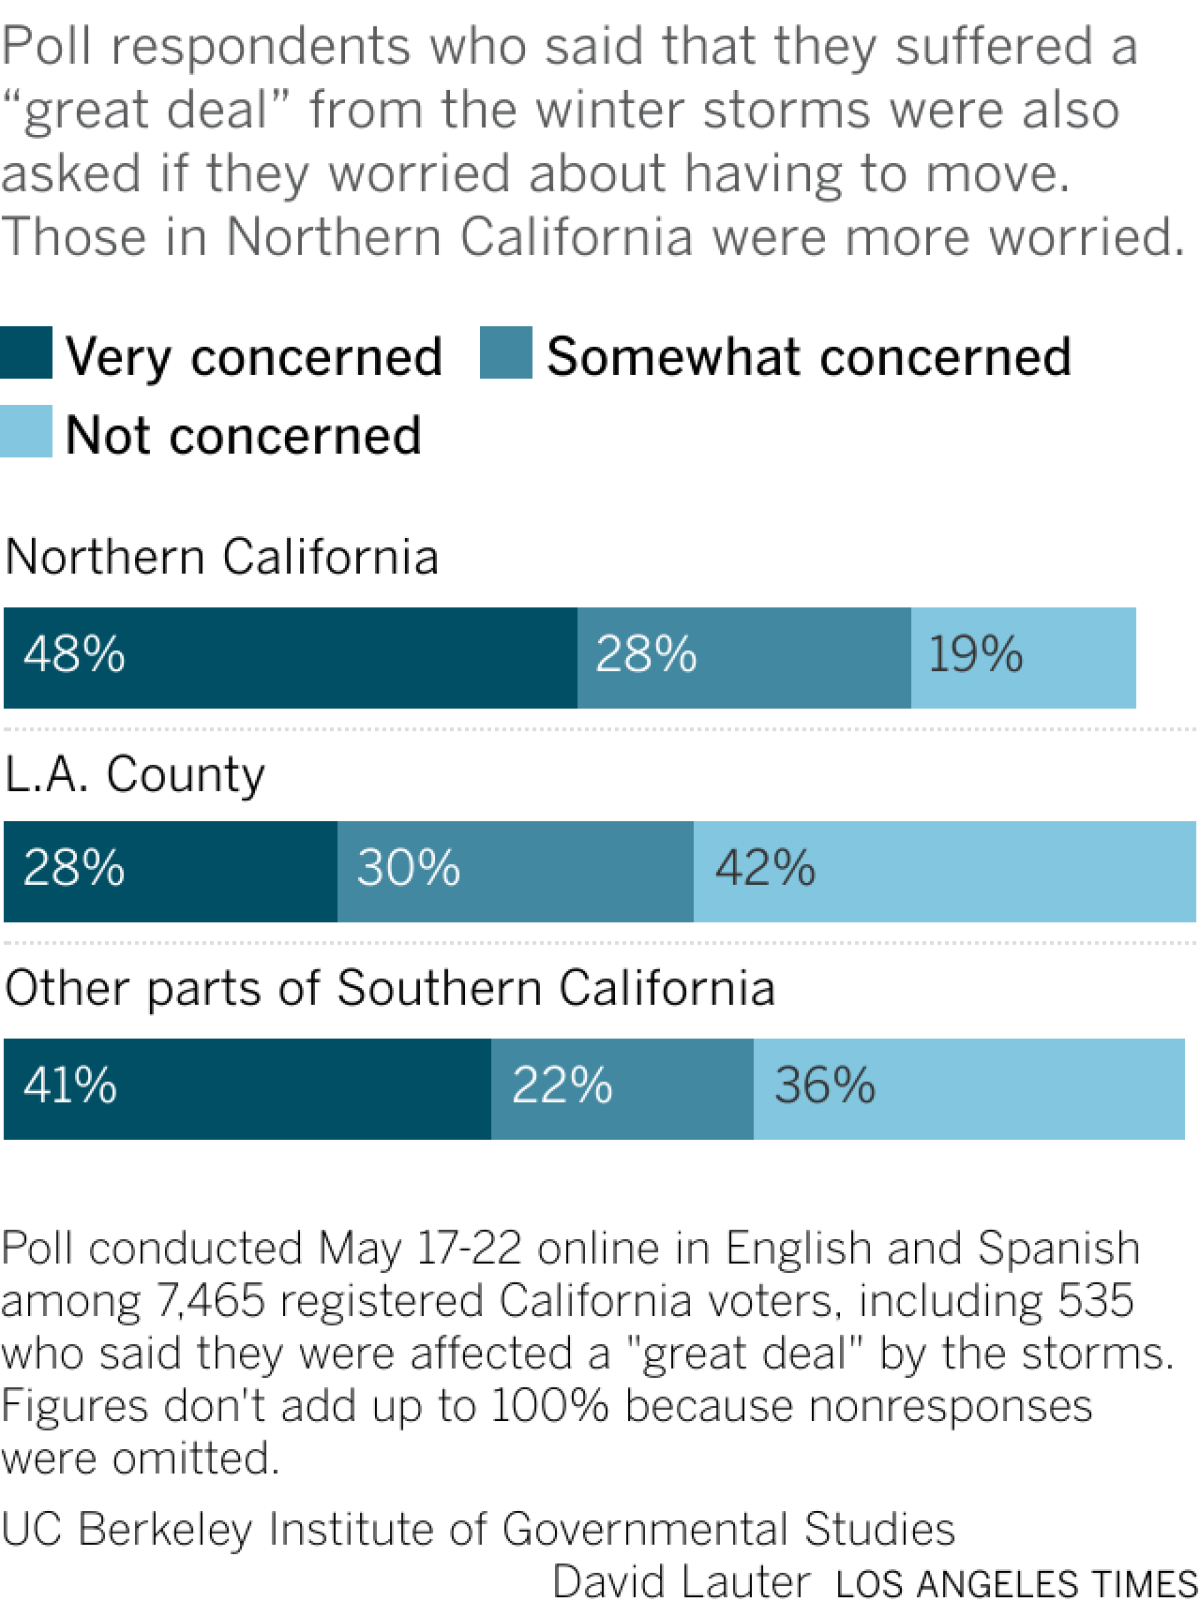 Stacked bar chart shows poll responses from people who had said that they suffered a "great deal" from the winter storms, regarding their concerns about moving. Those in Northern California were more concerned about having to move, followed by other areas in Southern California and Los Angeles County. Respondents were less concerned in Los Angeles County.